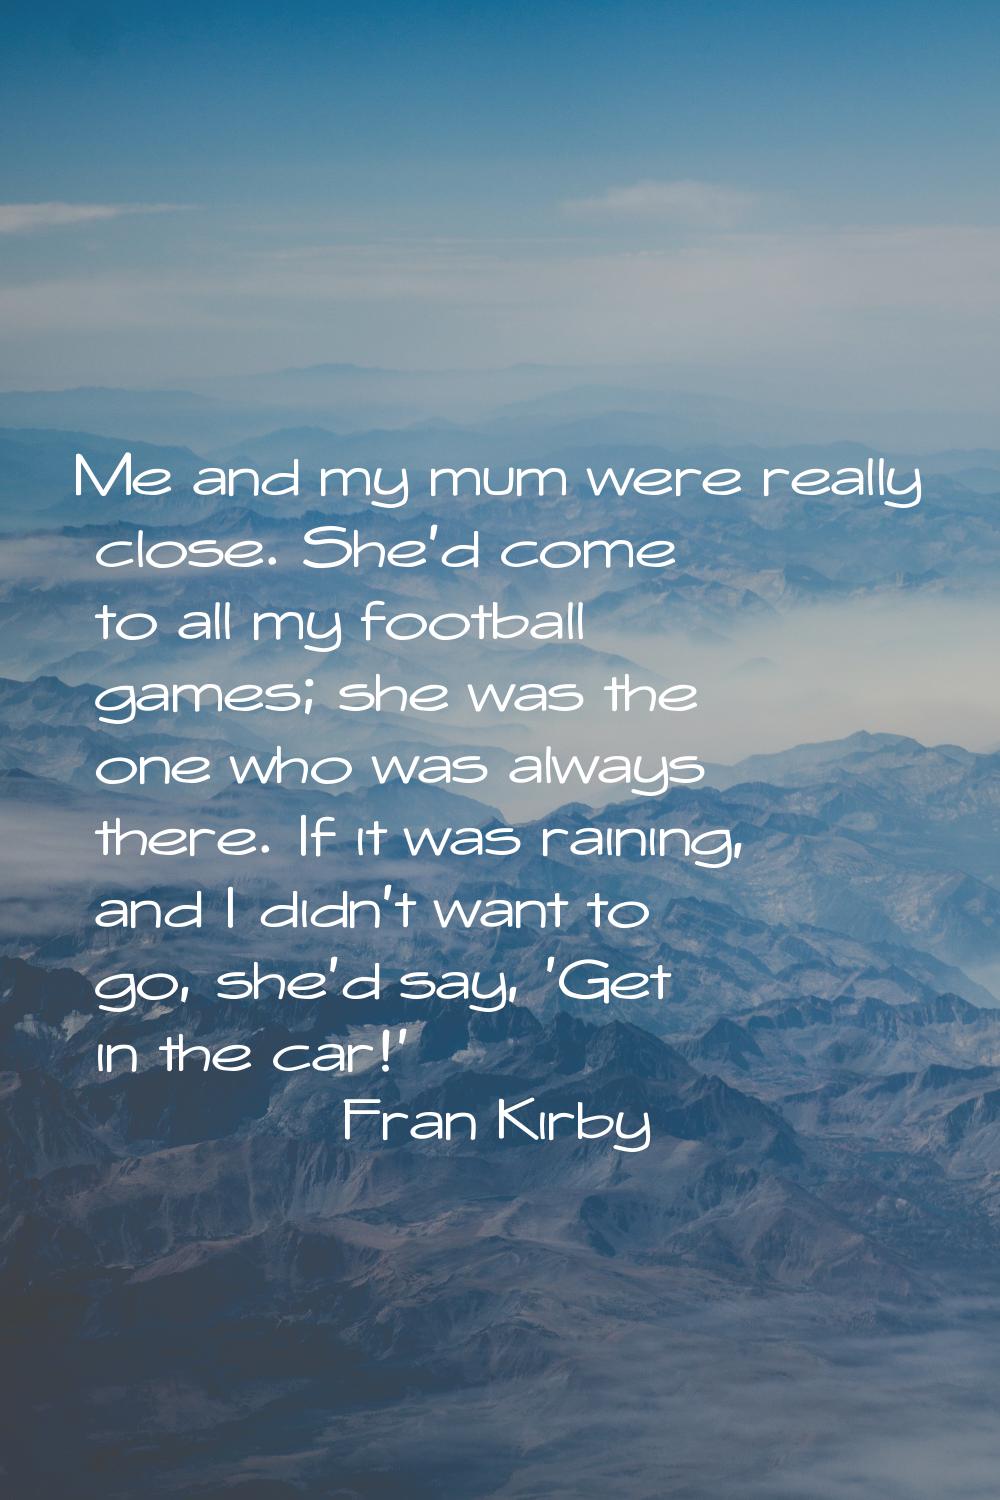 Me and my mum were really close. She'd come to all my football games; she was the one who was alway